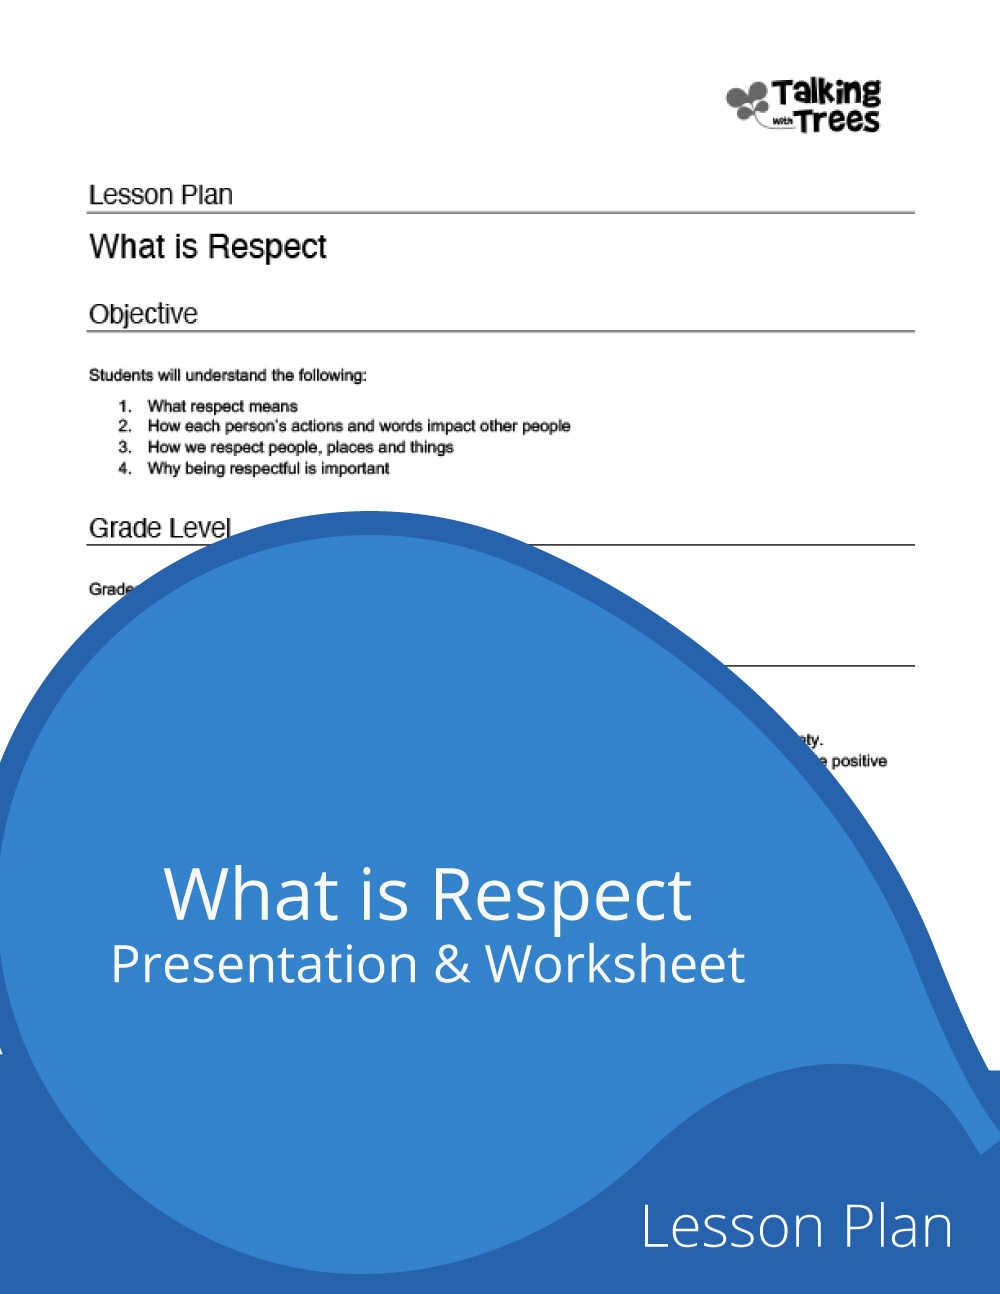 What is Respect Lesson Plan - Presentation